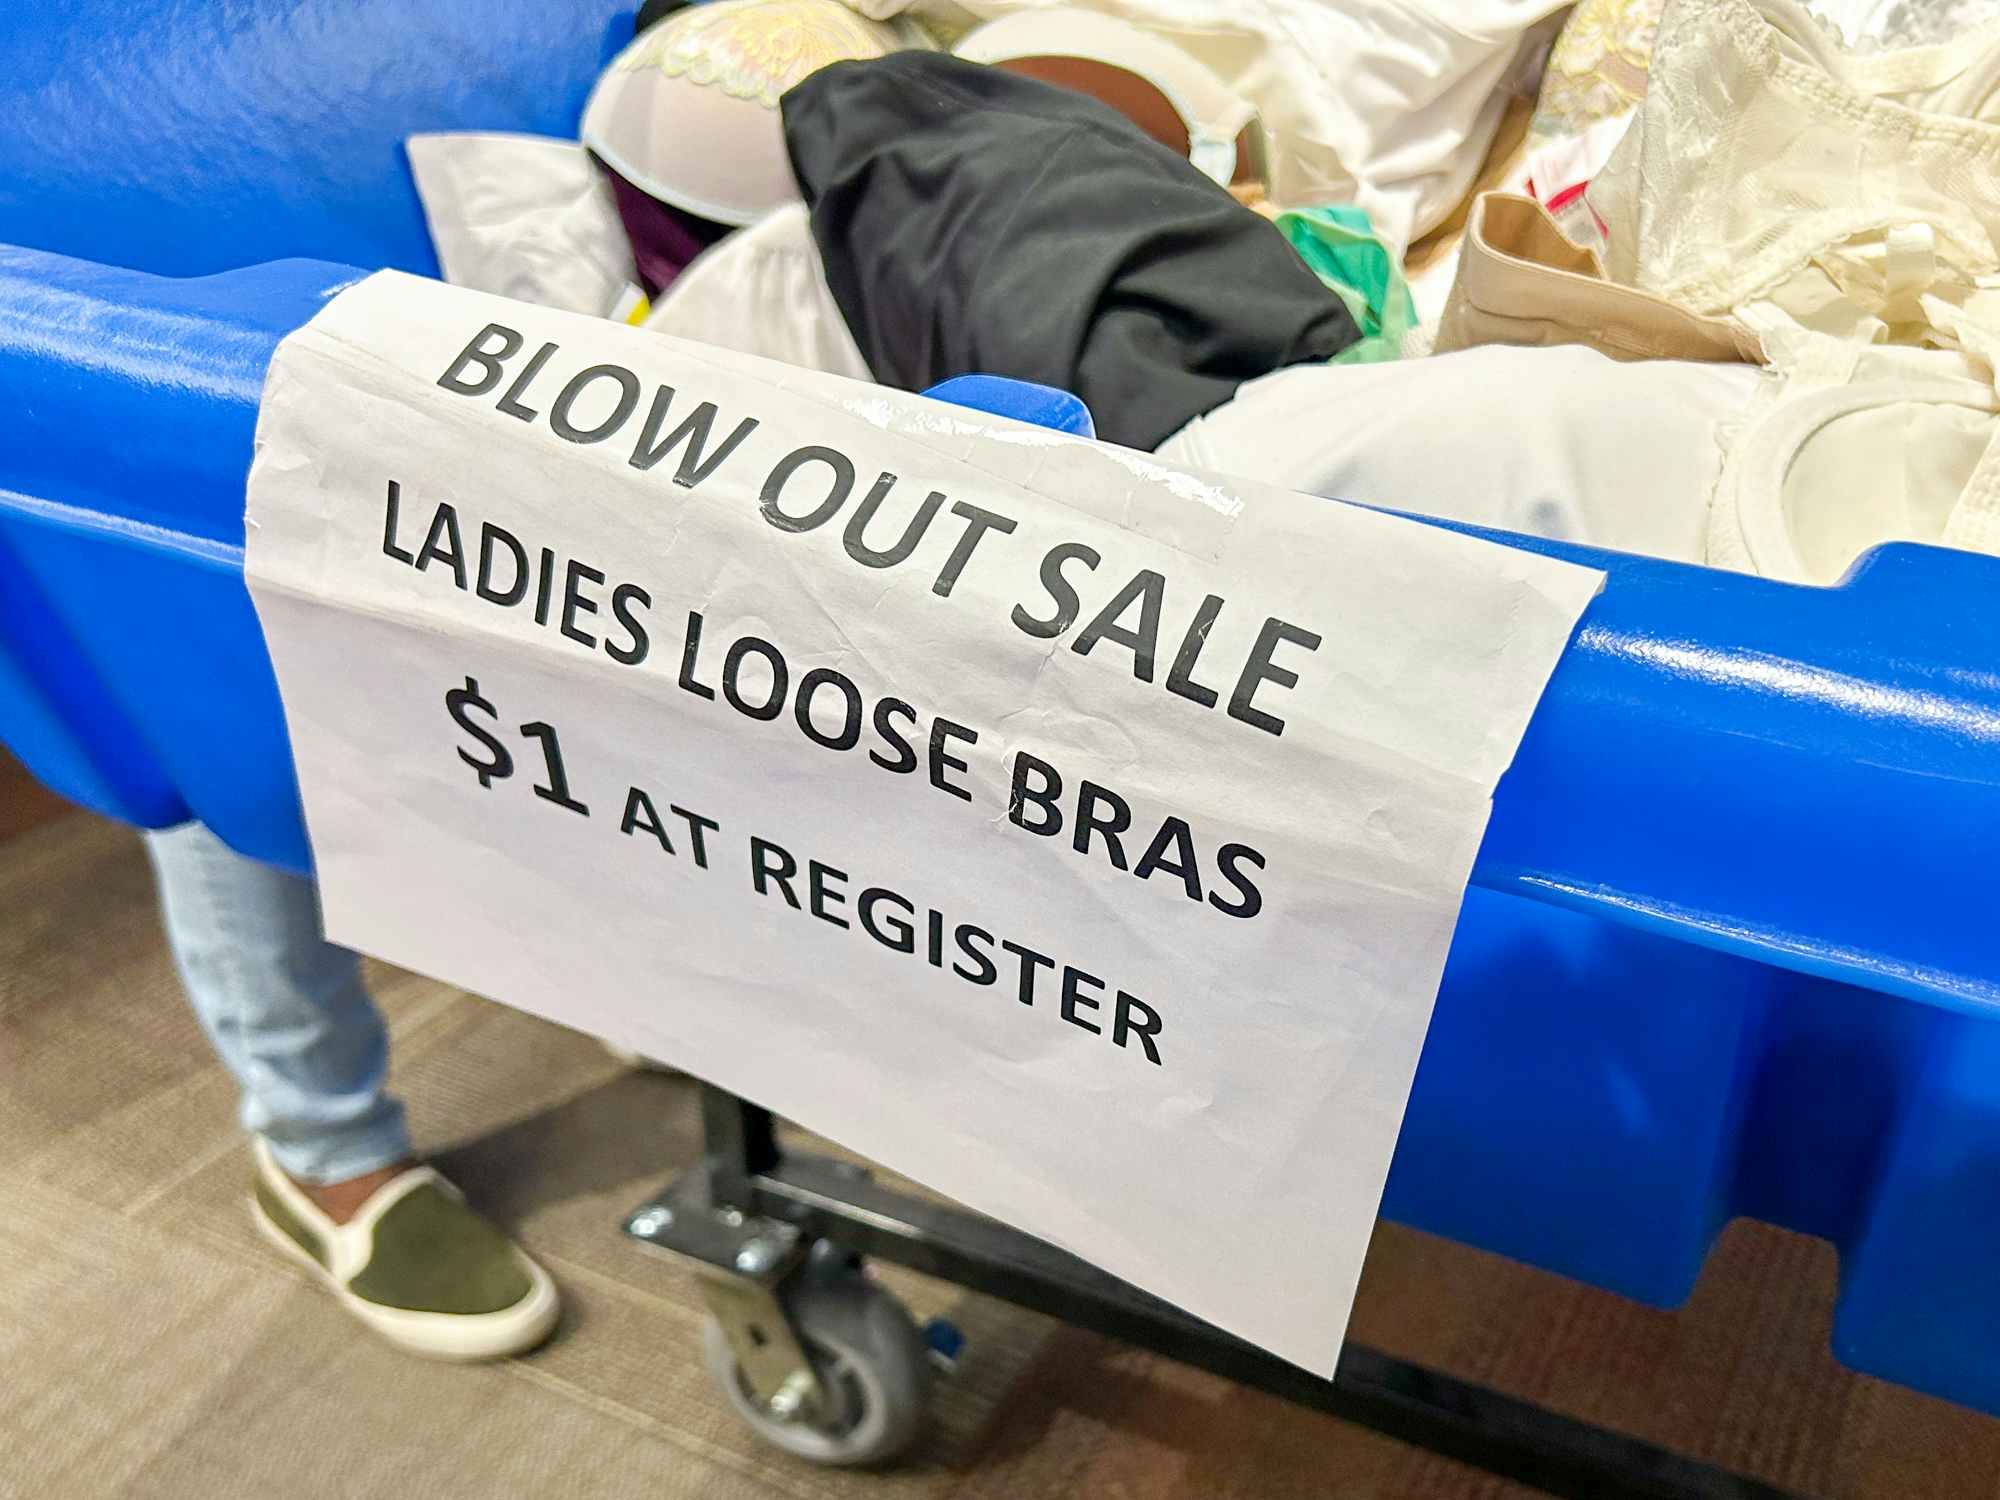 A bin with bras in it with a sign that says "Blow out sale. Loose bras $1 at register"